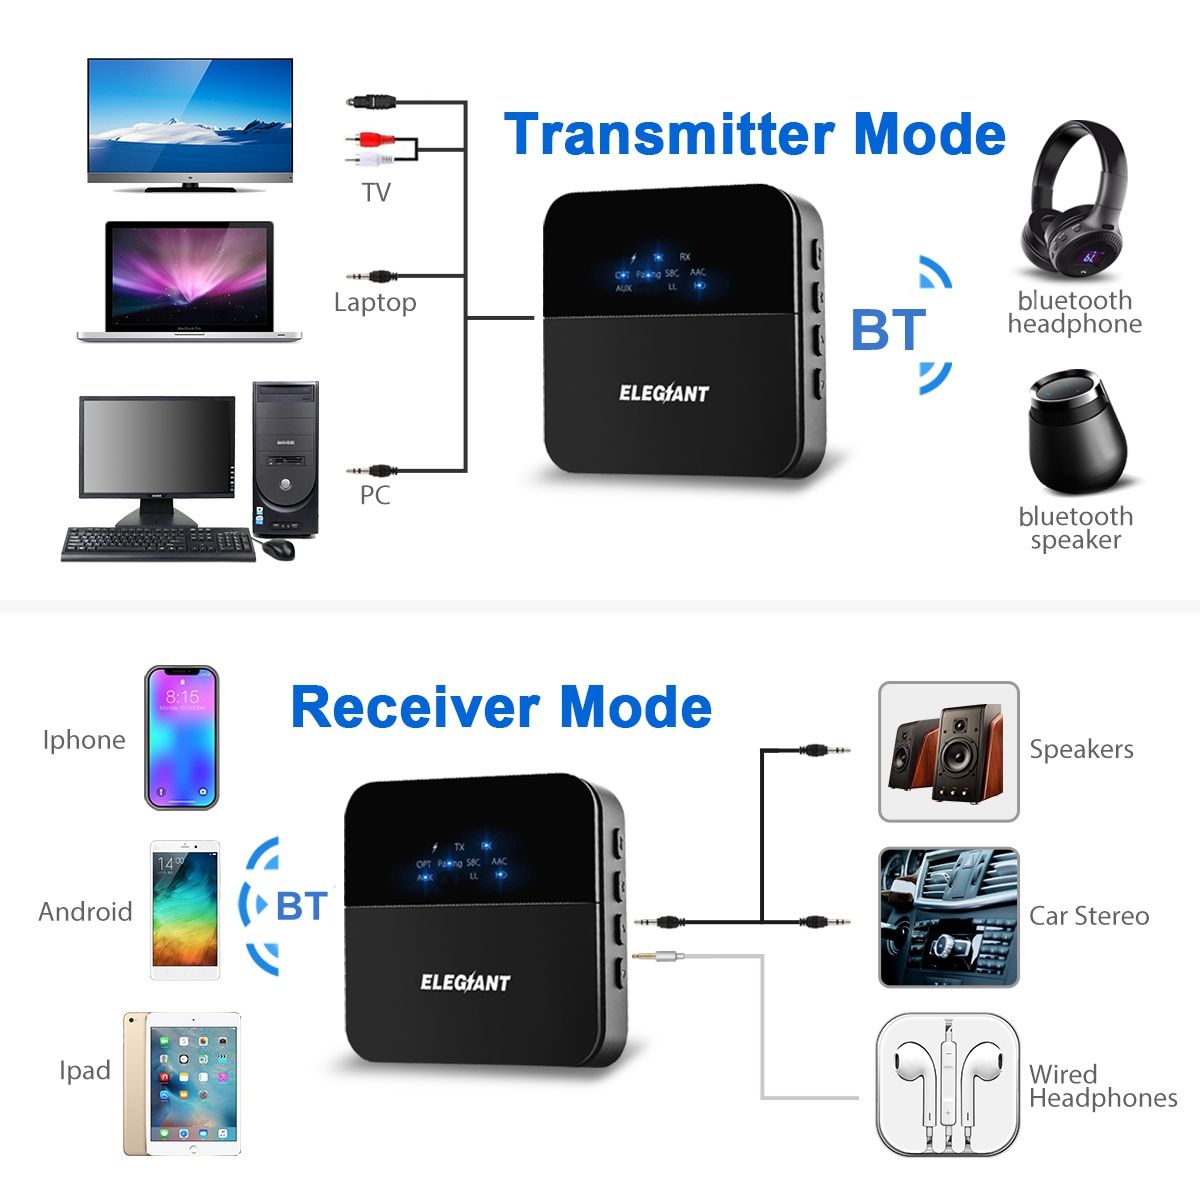 bluetooth-50-Transmitter-Receiver-Wireless-Audio-Adapter-20m-Range-with-35mm-Digital-Optical-Toslink-1637882